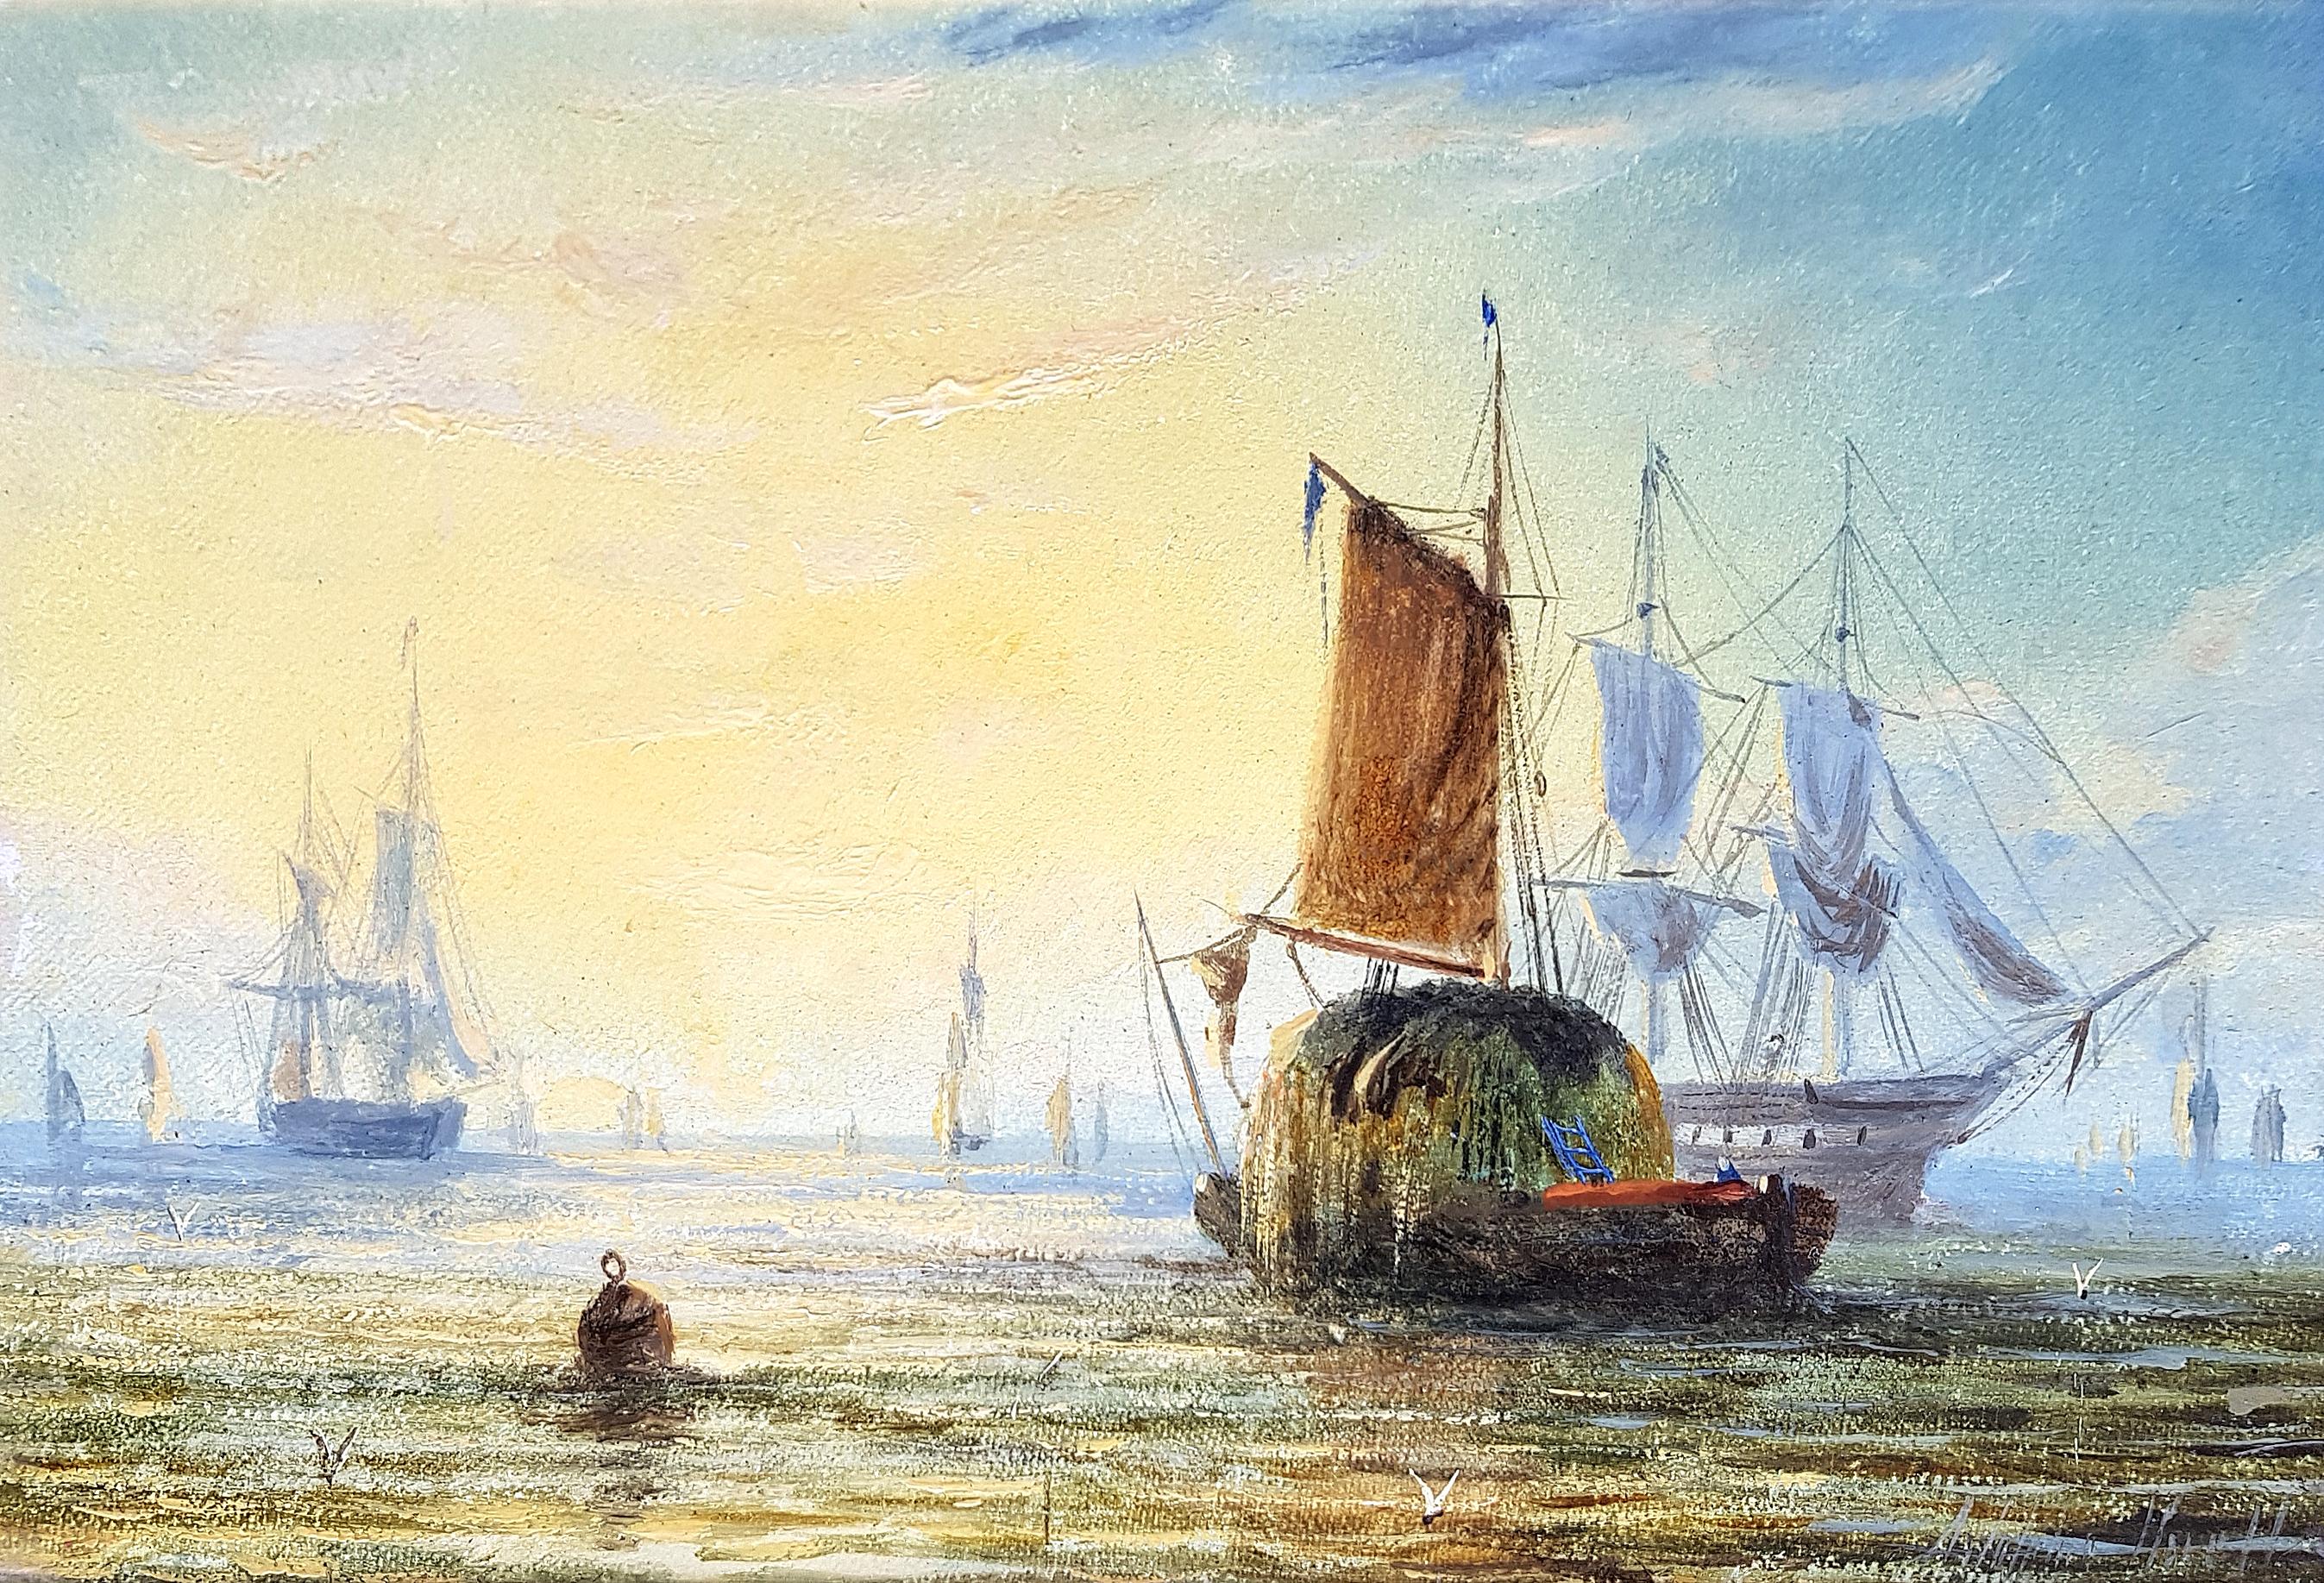 Thames Barges (Pair) - Gray Landscape Painting by Adolphus Knell